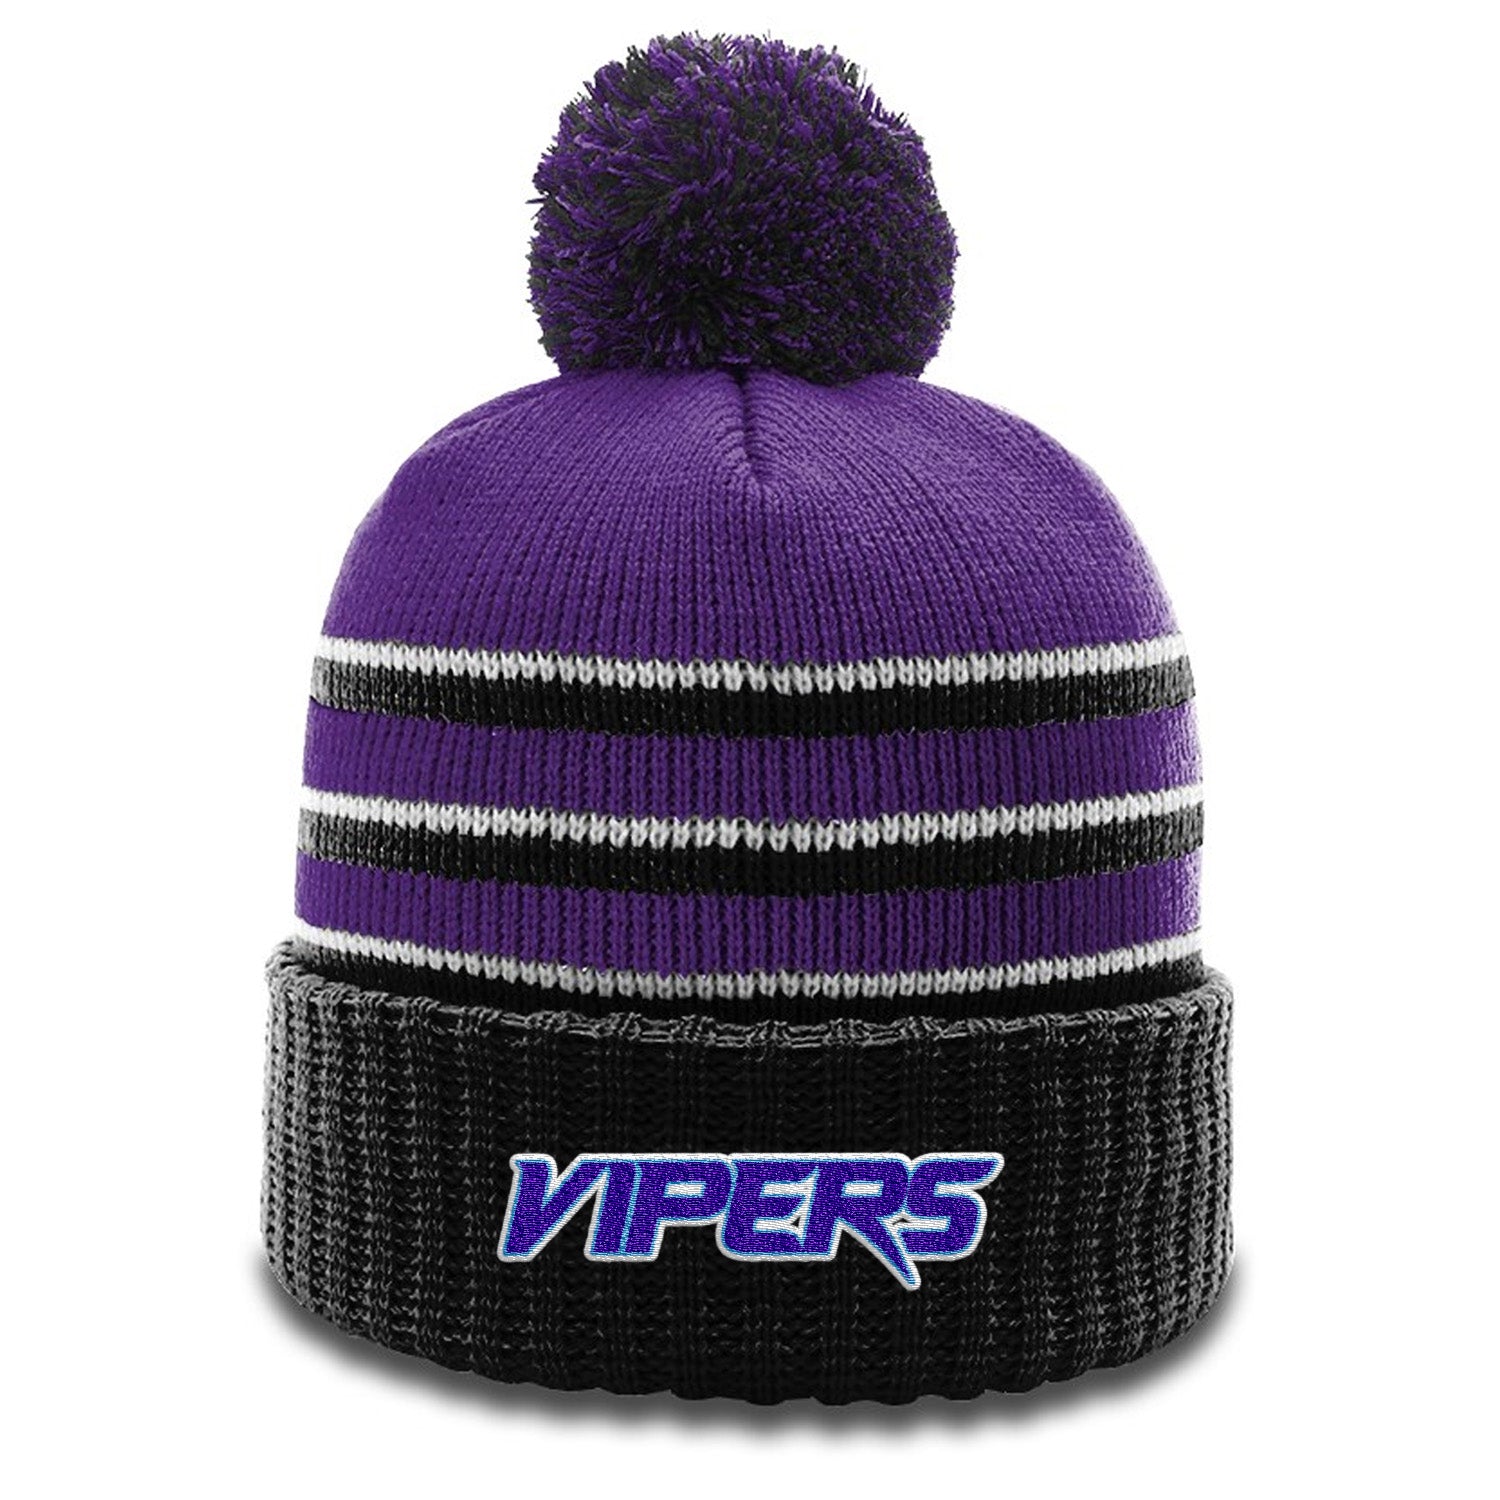 Vipers Team Beanie with Pom